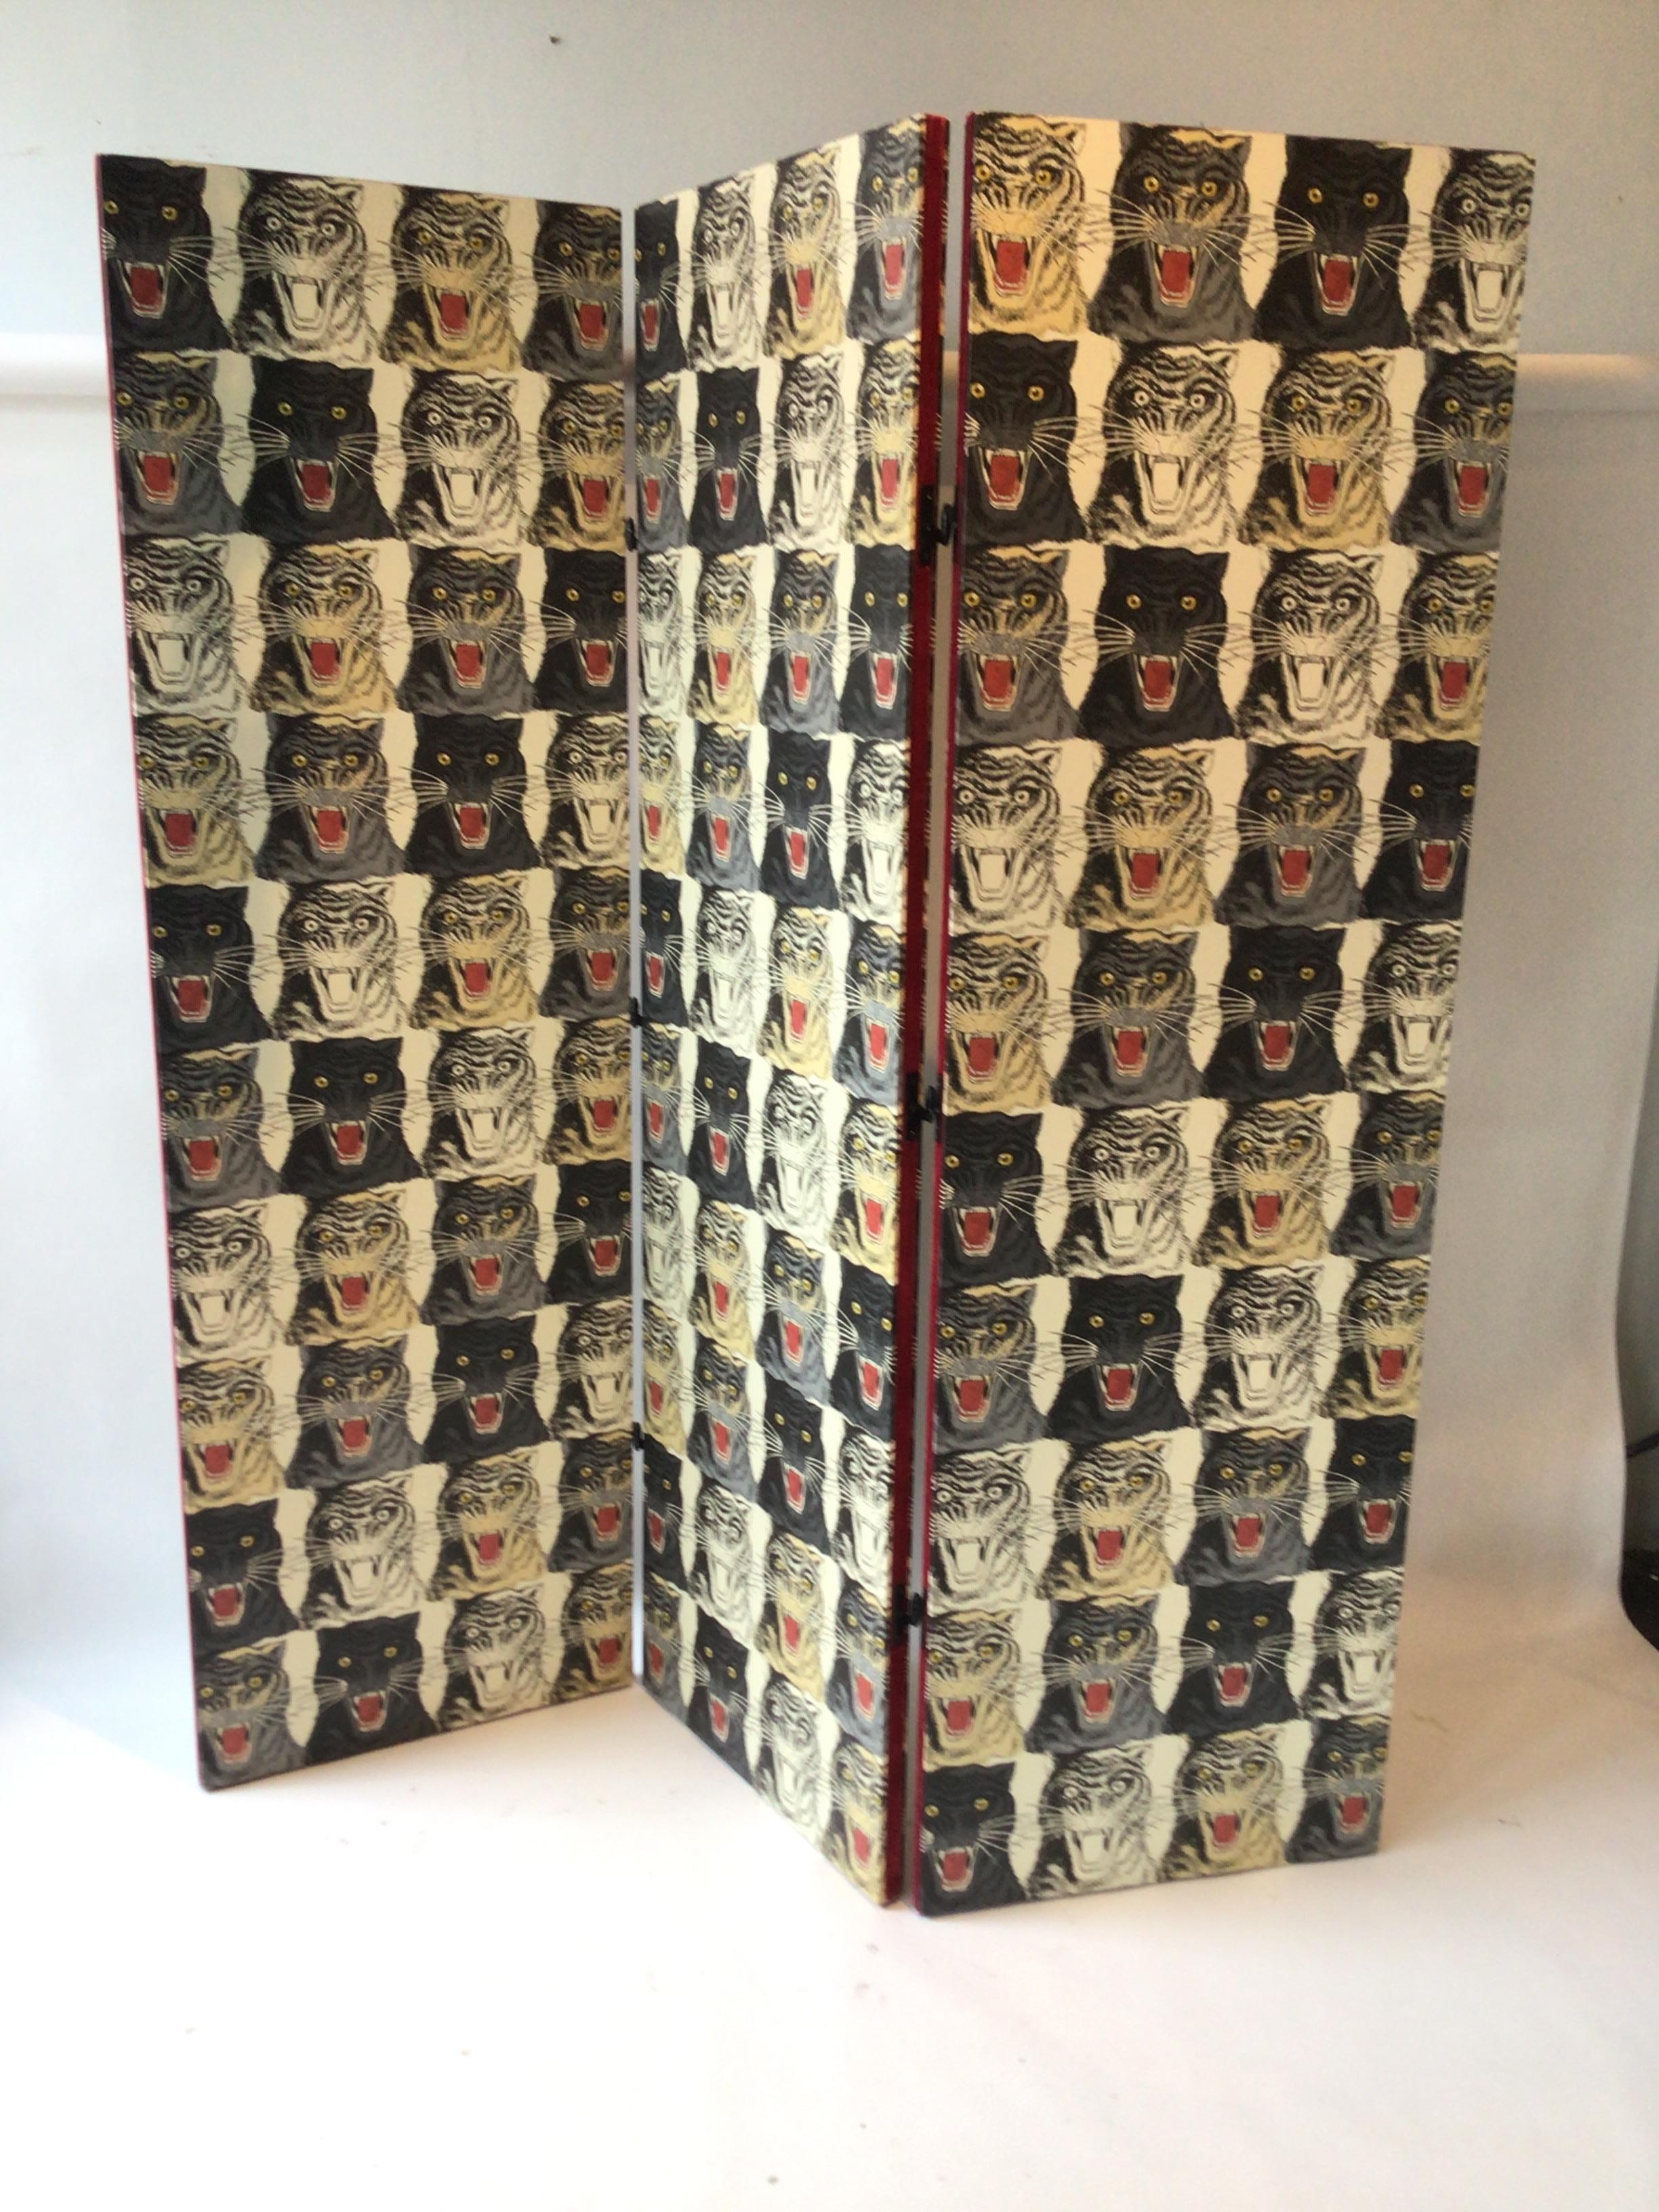 Custom made 3 panel screen covered in Gucci tiger wallpaper. Both sides of the screen are wallpapered. 